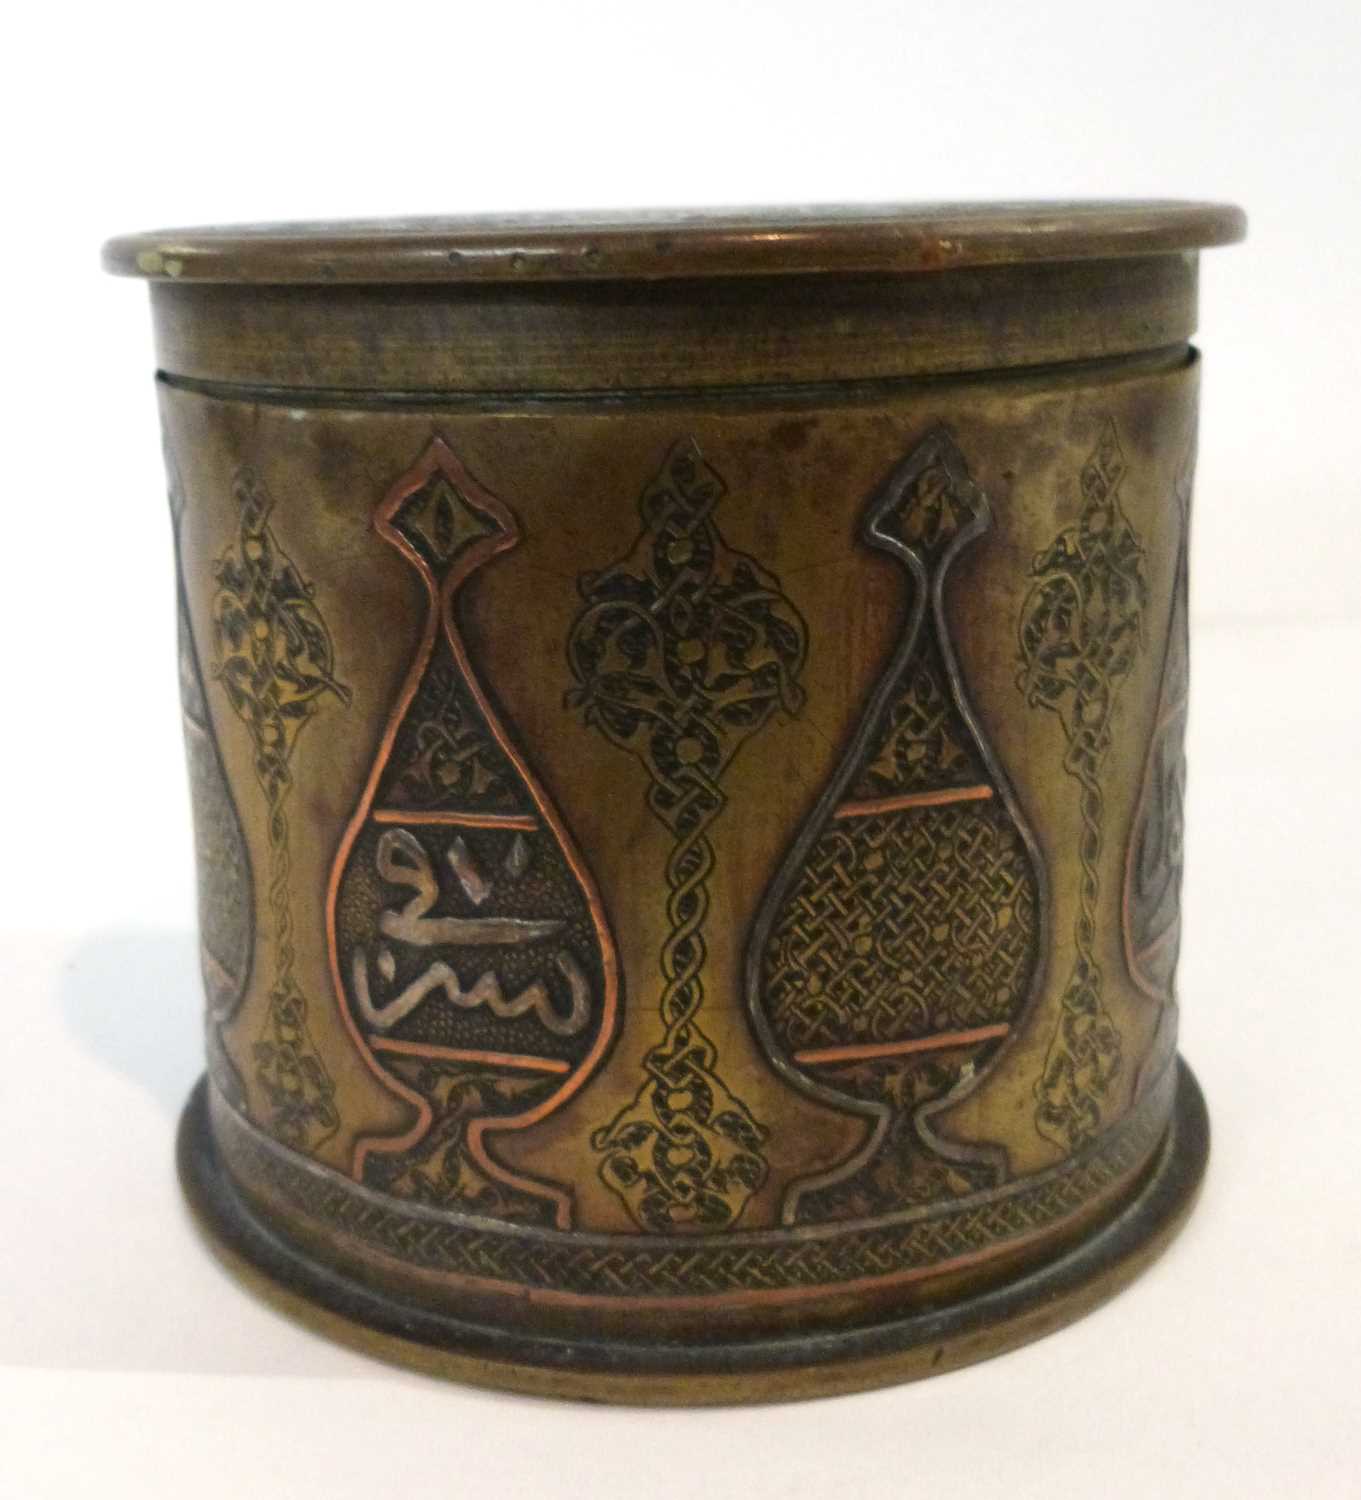 Trench Art - A German shell case and cover dated 1915 decorated with Islamic vases and script, - Image 2 of 6